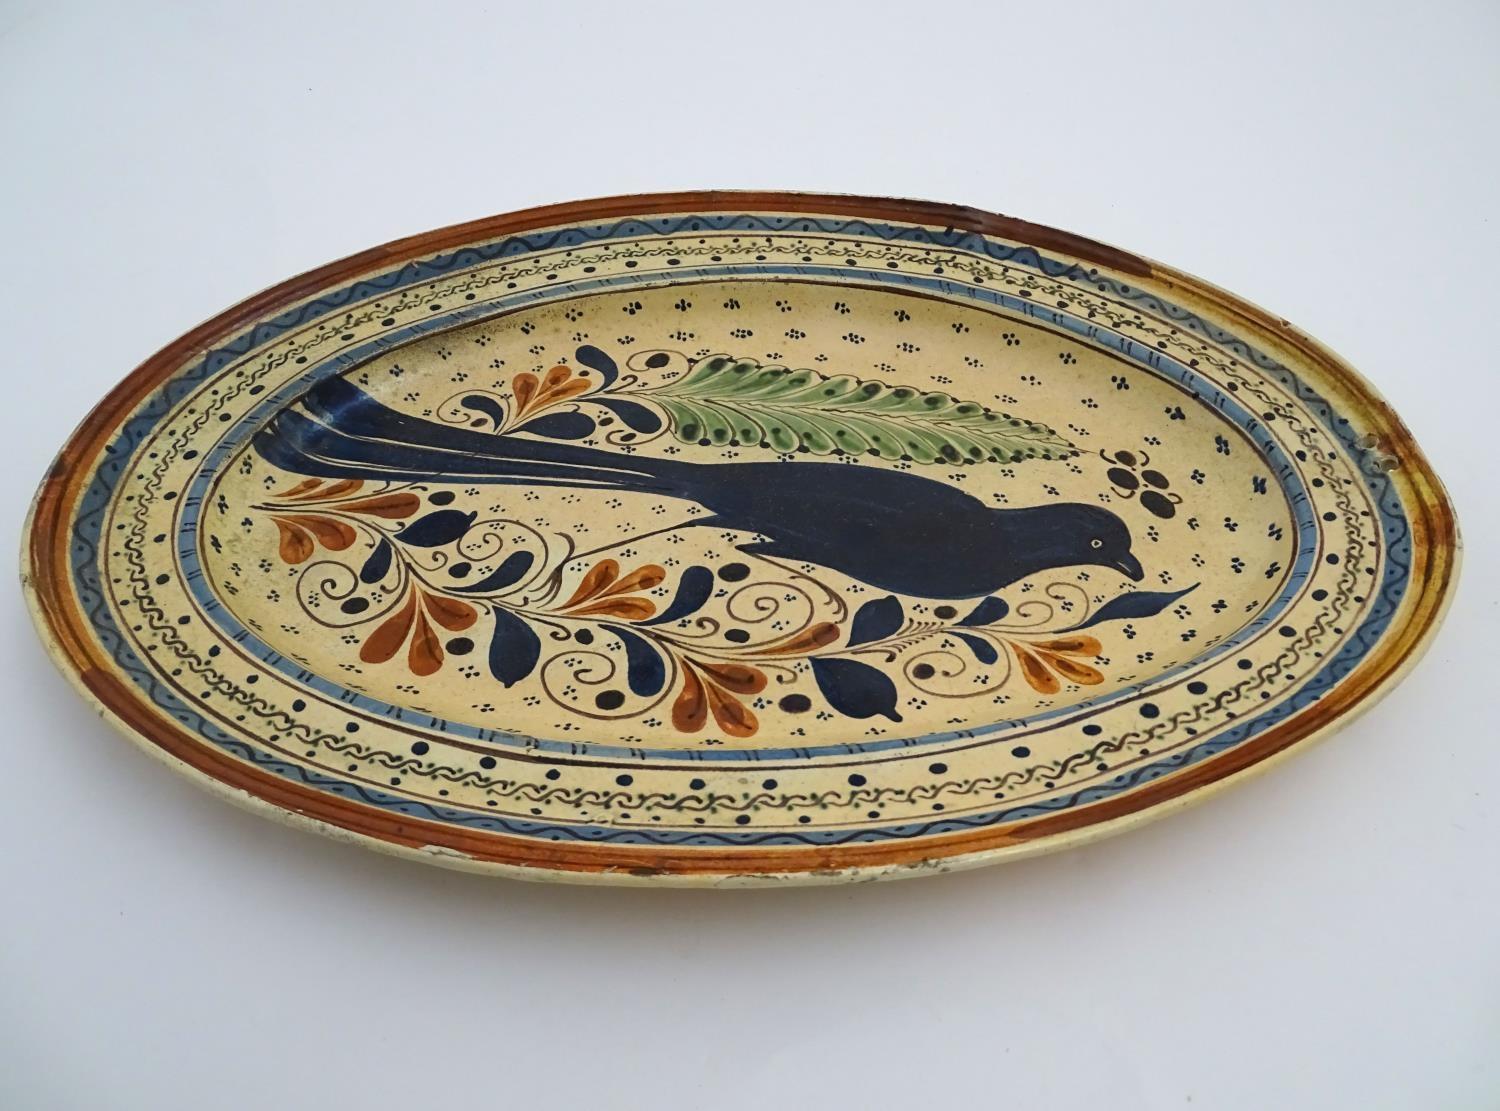 A Swiss terracotta oval pottery dish with hand painted folk art decoration depicting a bird - Image 4 of 6